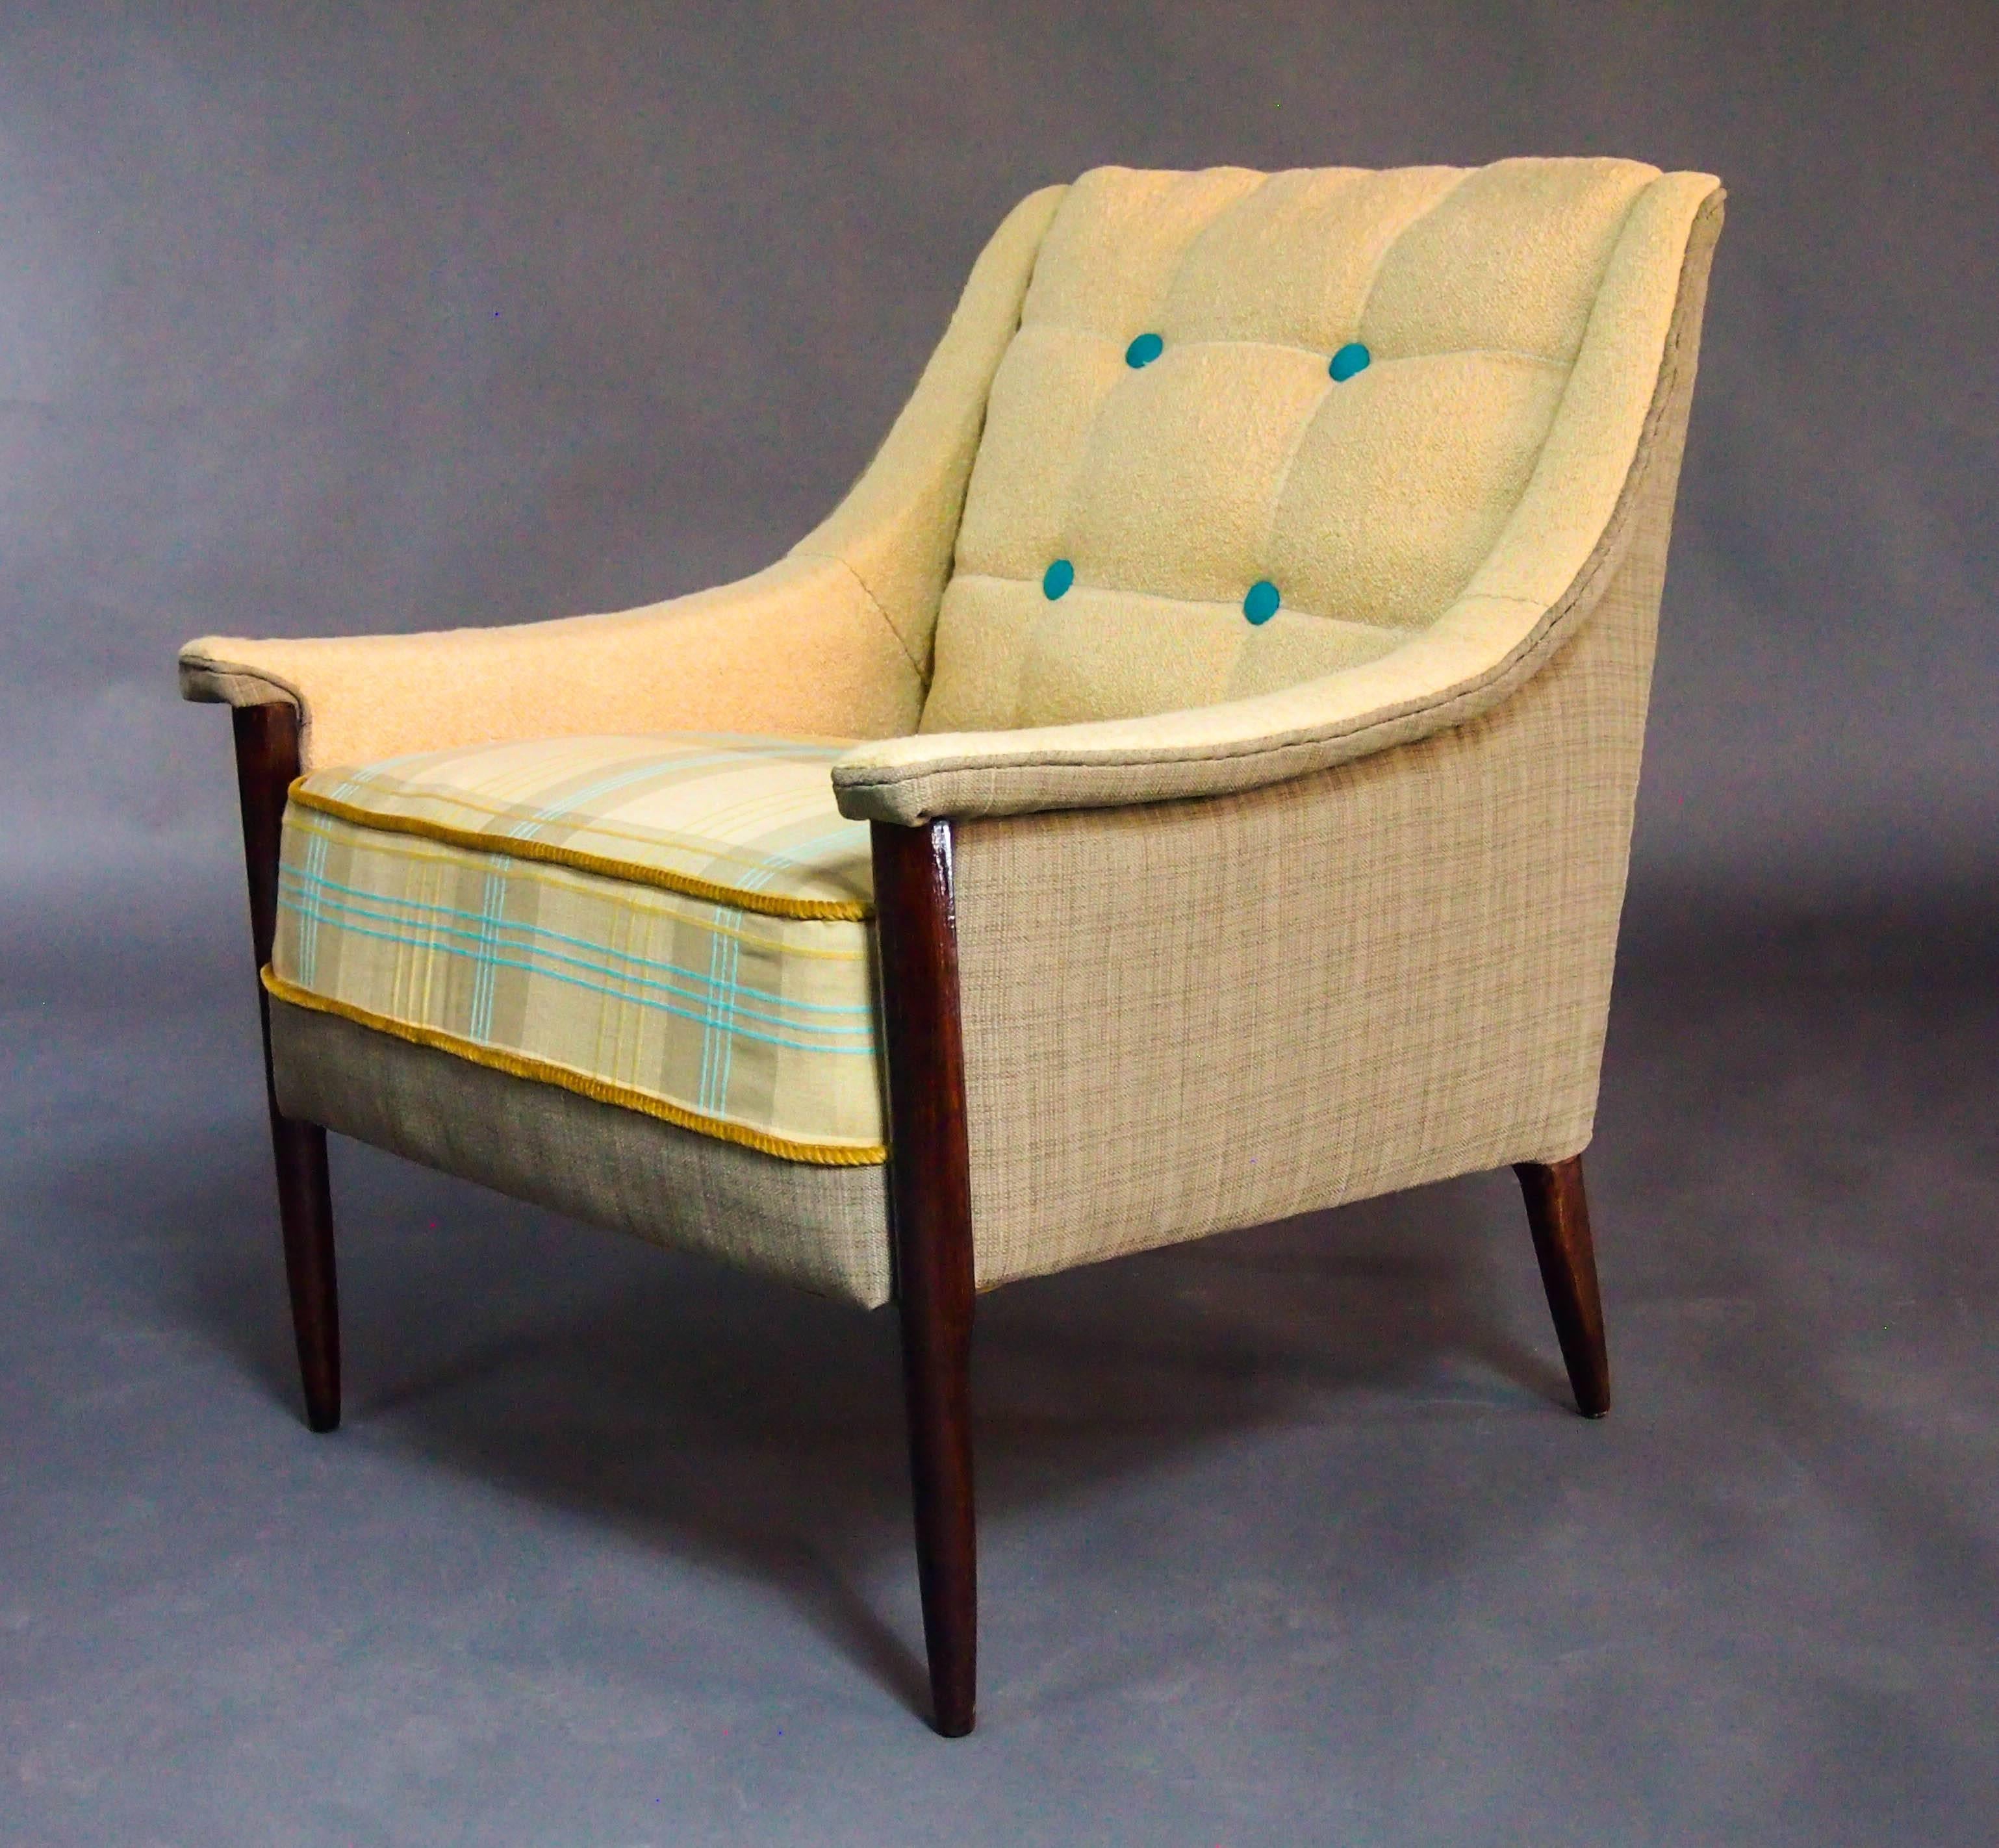 A delicate Kroehler frame from the mid-1950s in the Folke Ohlssen DUX style, stripped bare and given new life. Two subtle plaids and cream colored inside back make this chair simply sophisticated and texture and accenting buttons add interest.